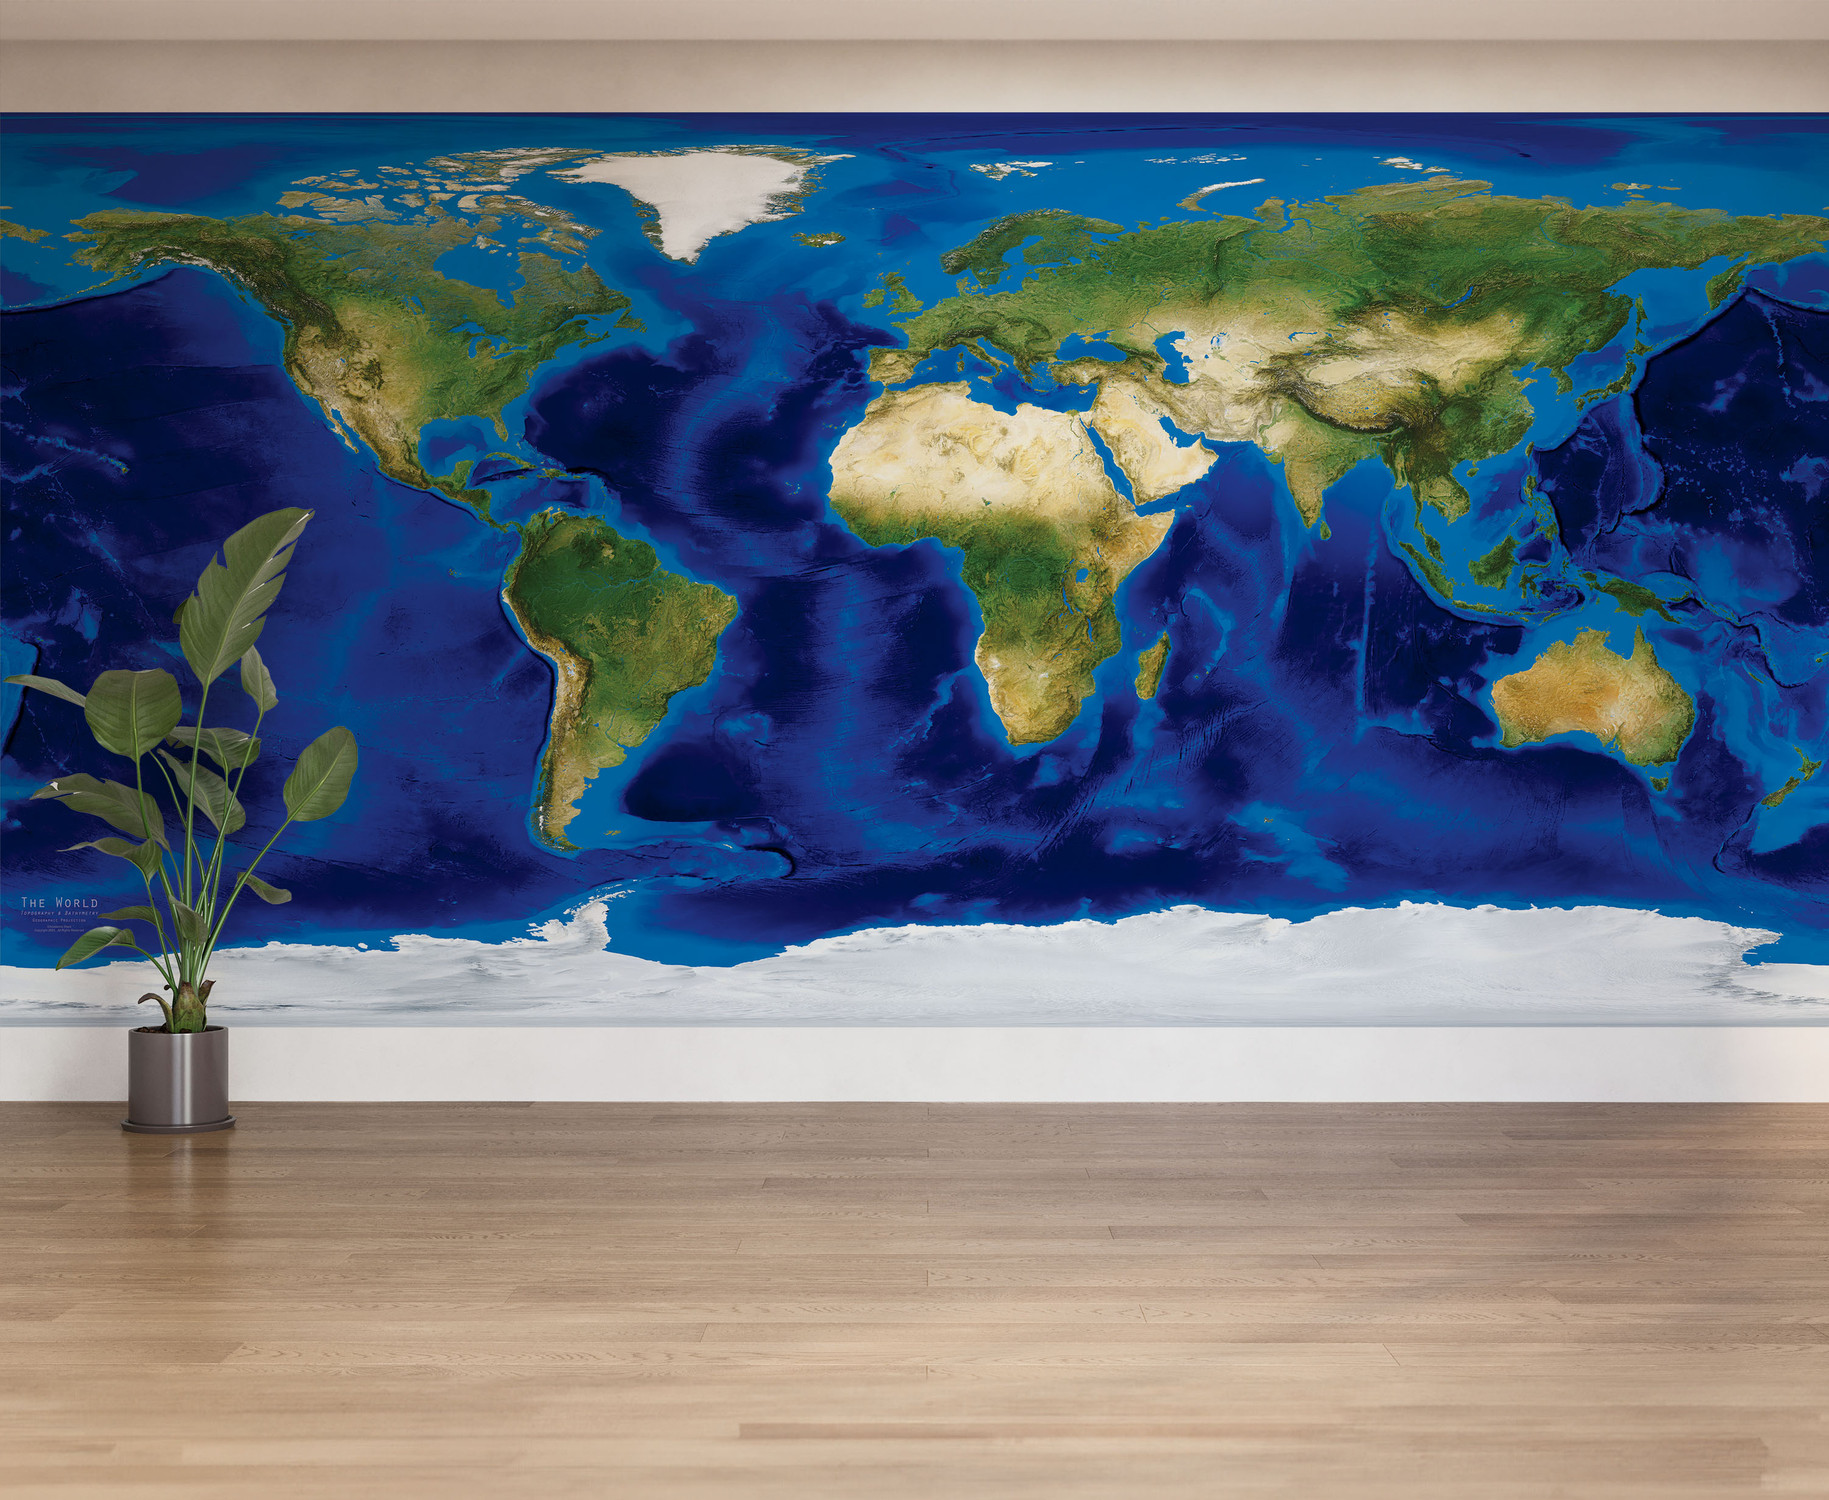 World Topography & Bathymetry Satellite Image Map Wall Mural in Room